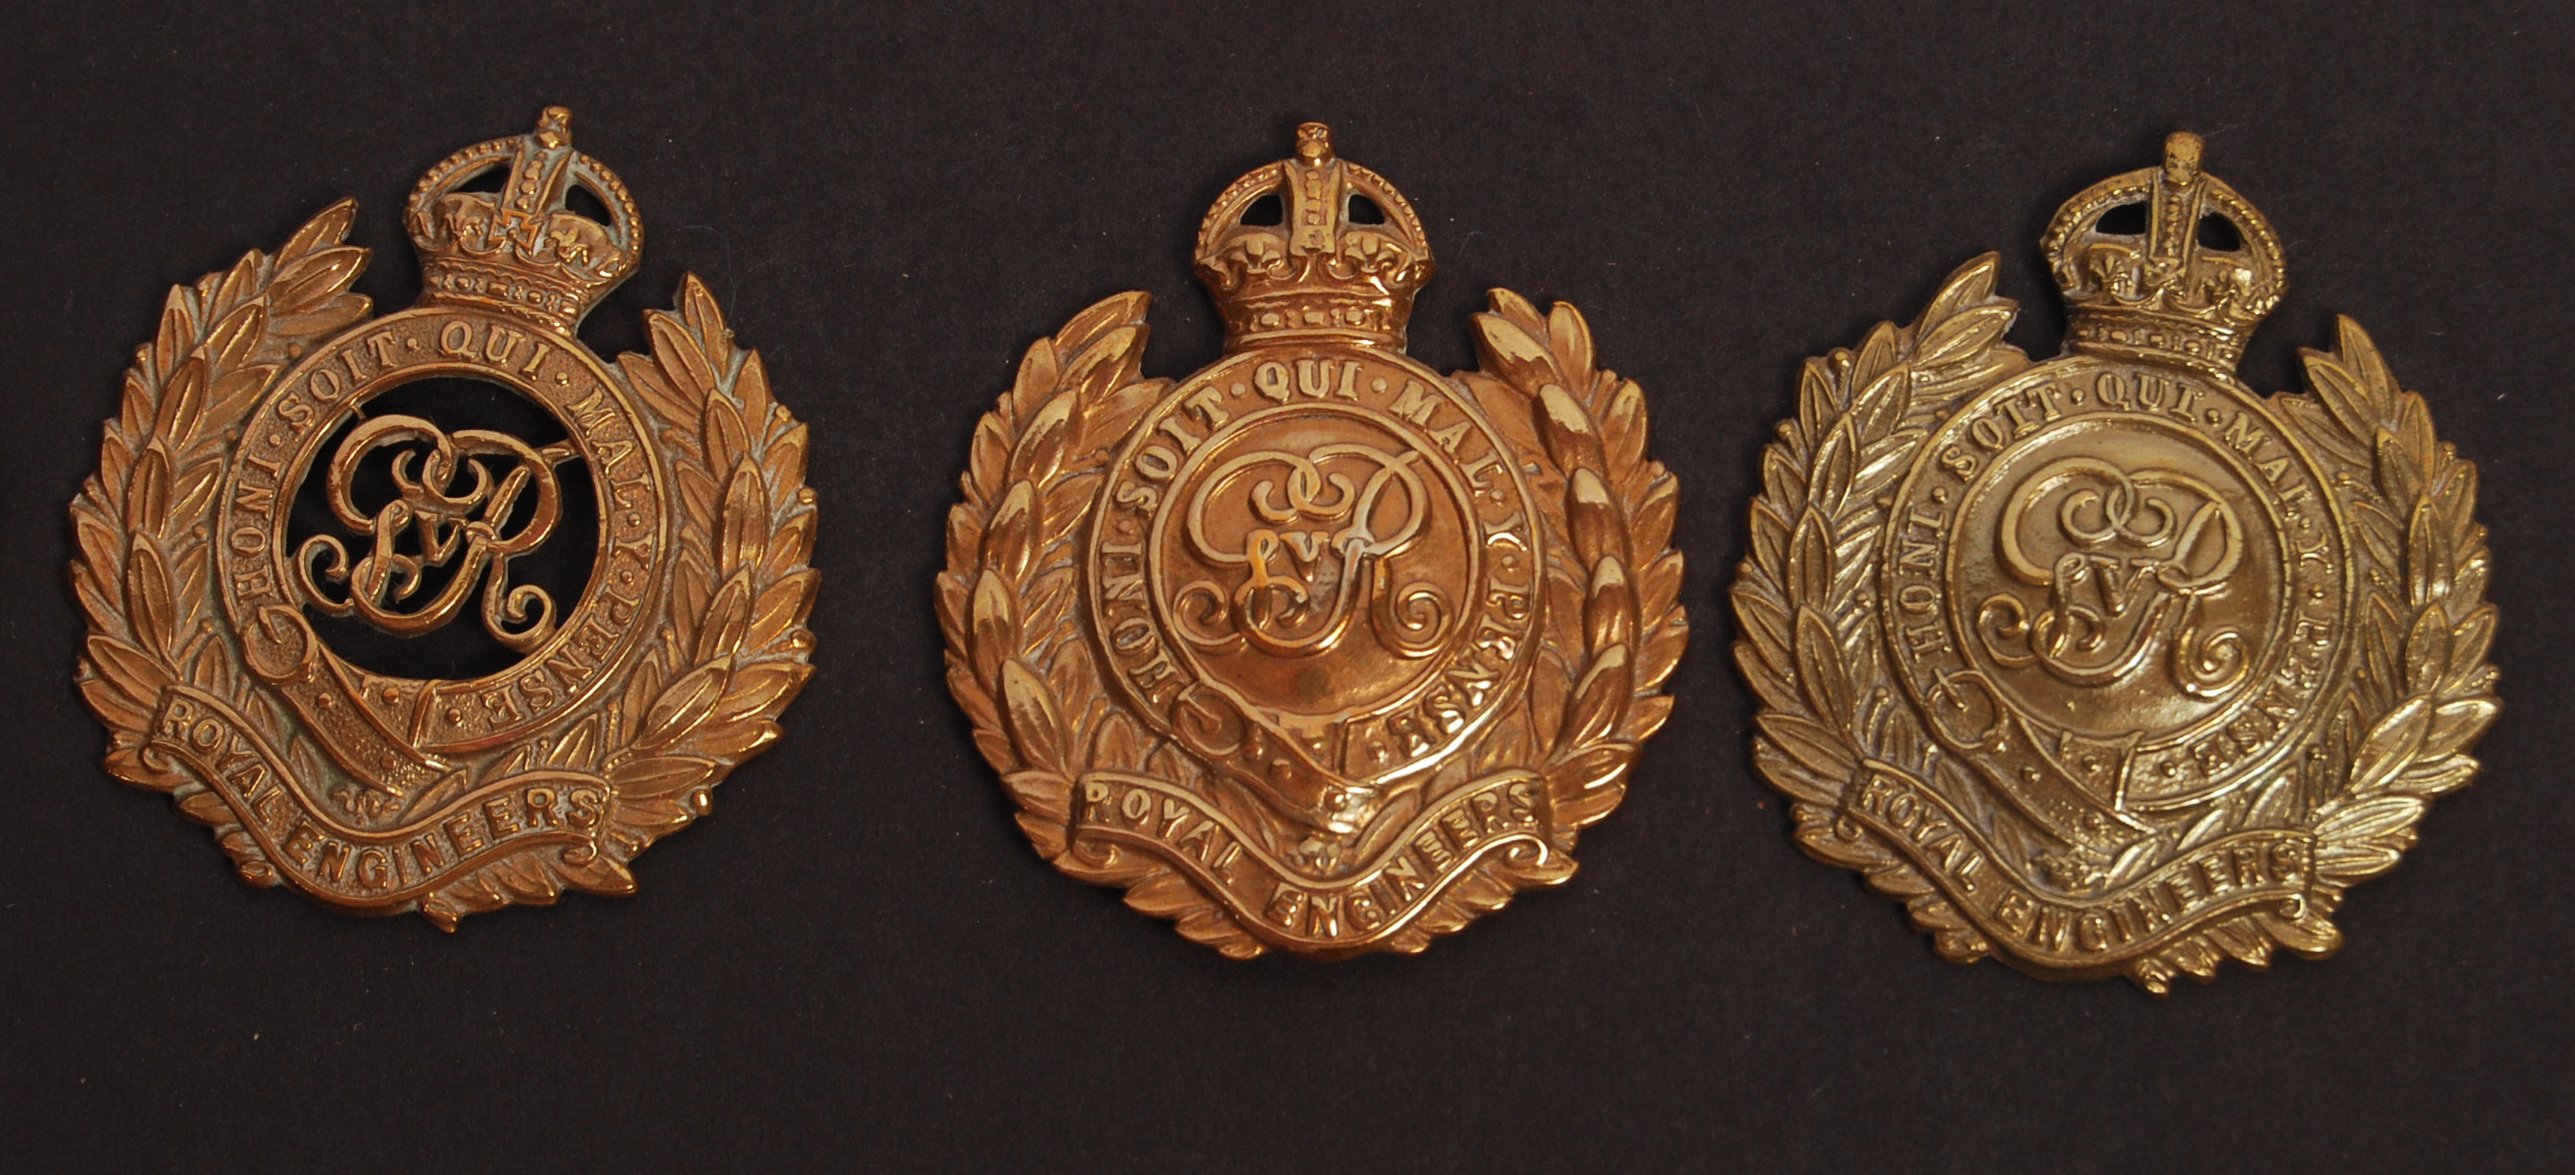 BRITISH ARMY ROYAL ENGINEERS CAP BADGE COLLECTION - WWI TO NOW - Image 3 of 5